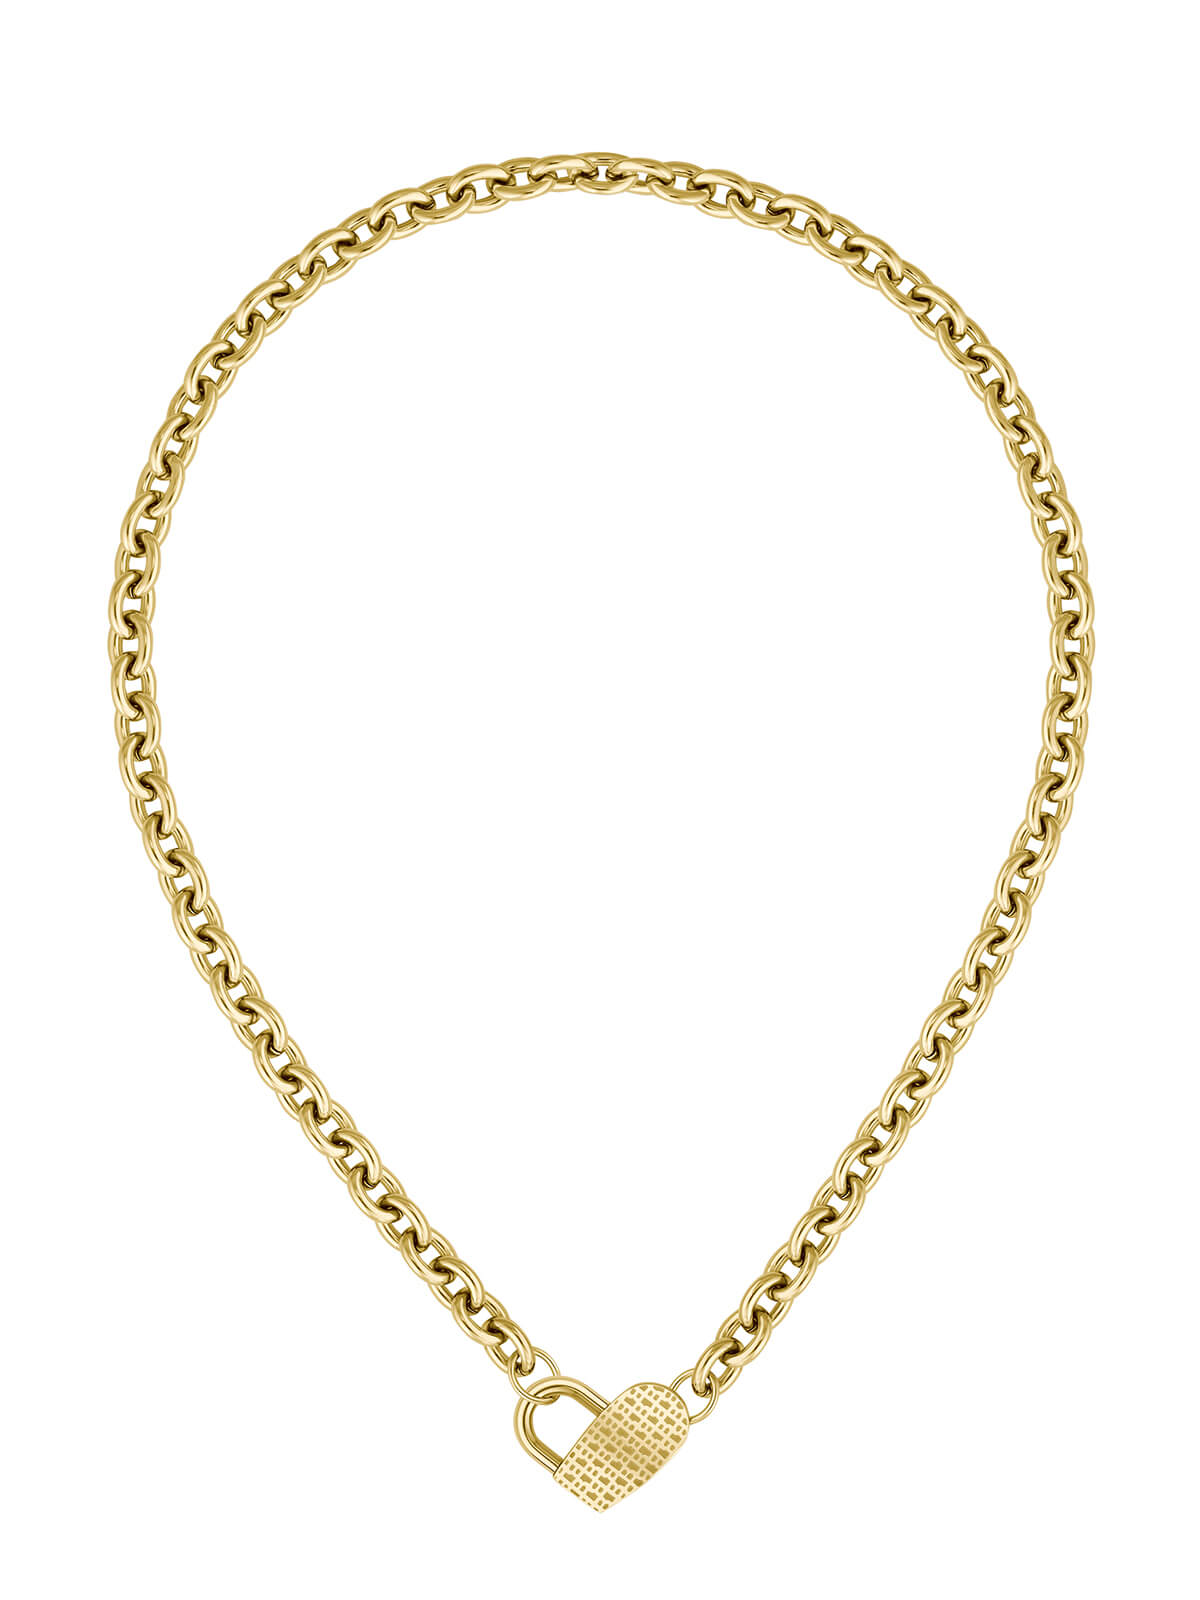 BOSS Dinya Necklace in Gold Plating 1580417